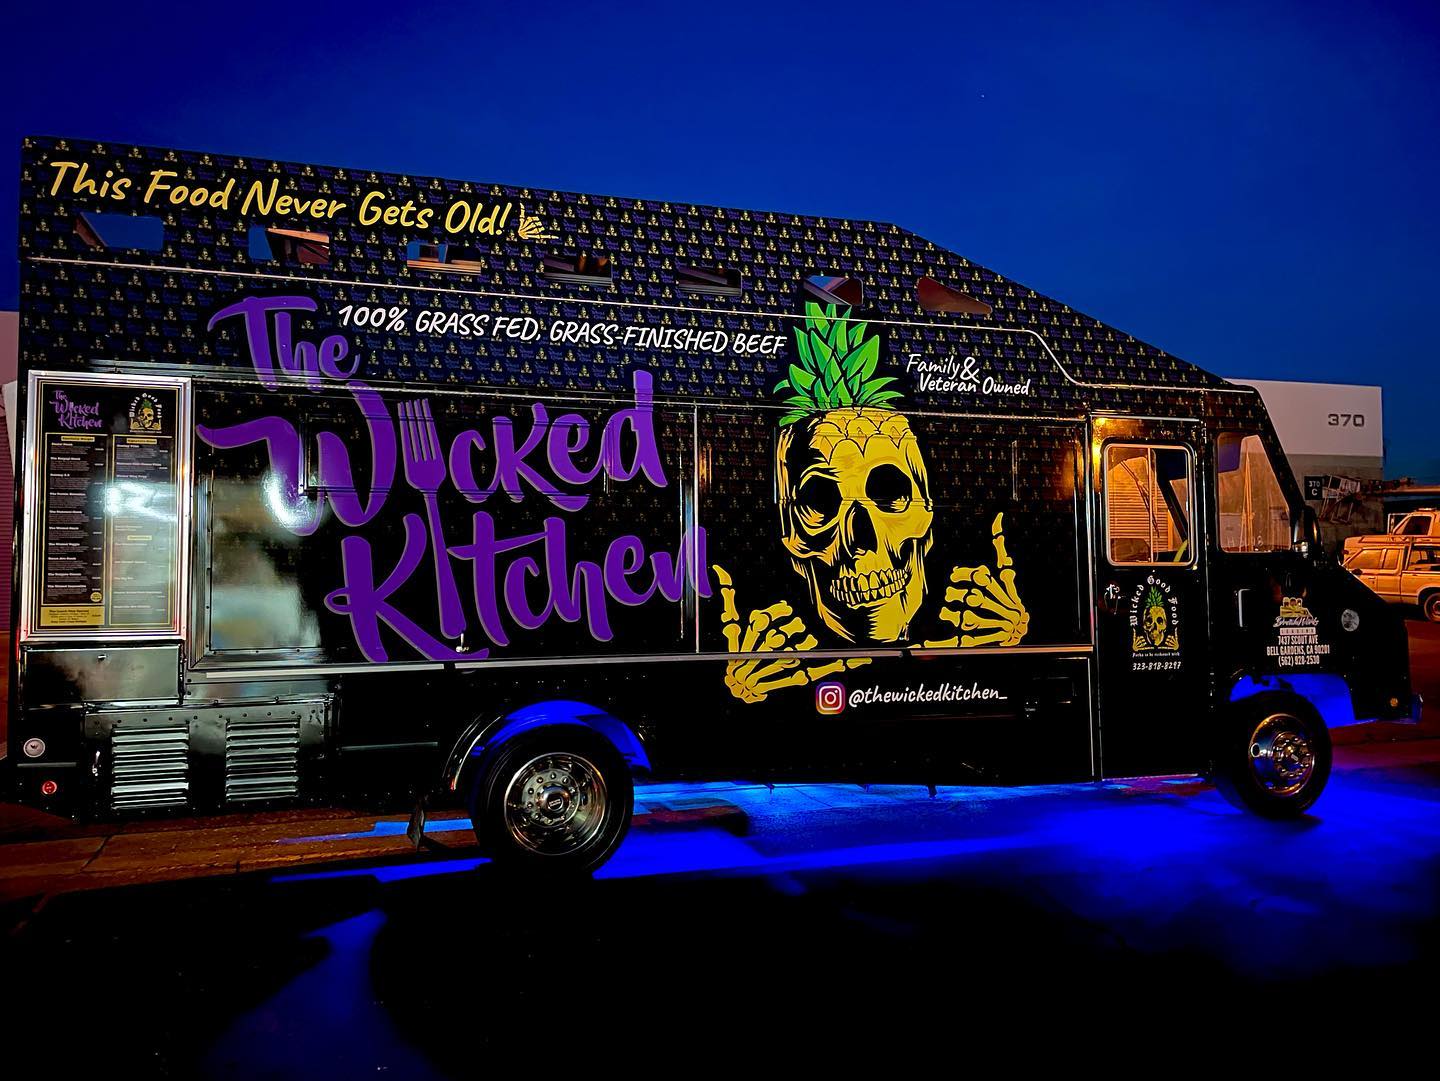 The Wicked Kitchen Food Truck